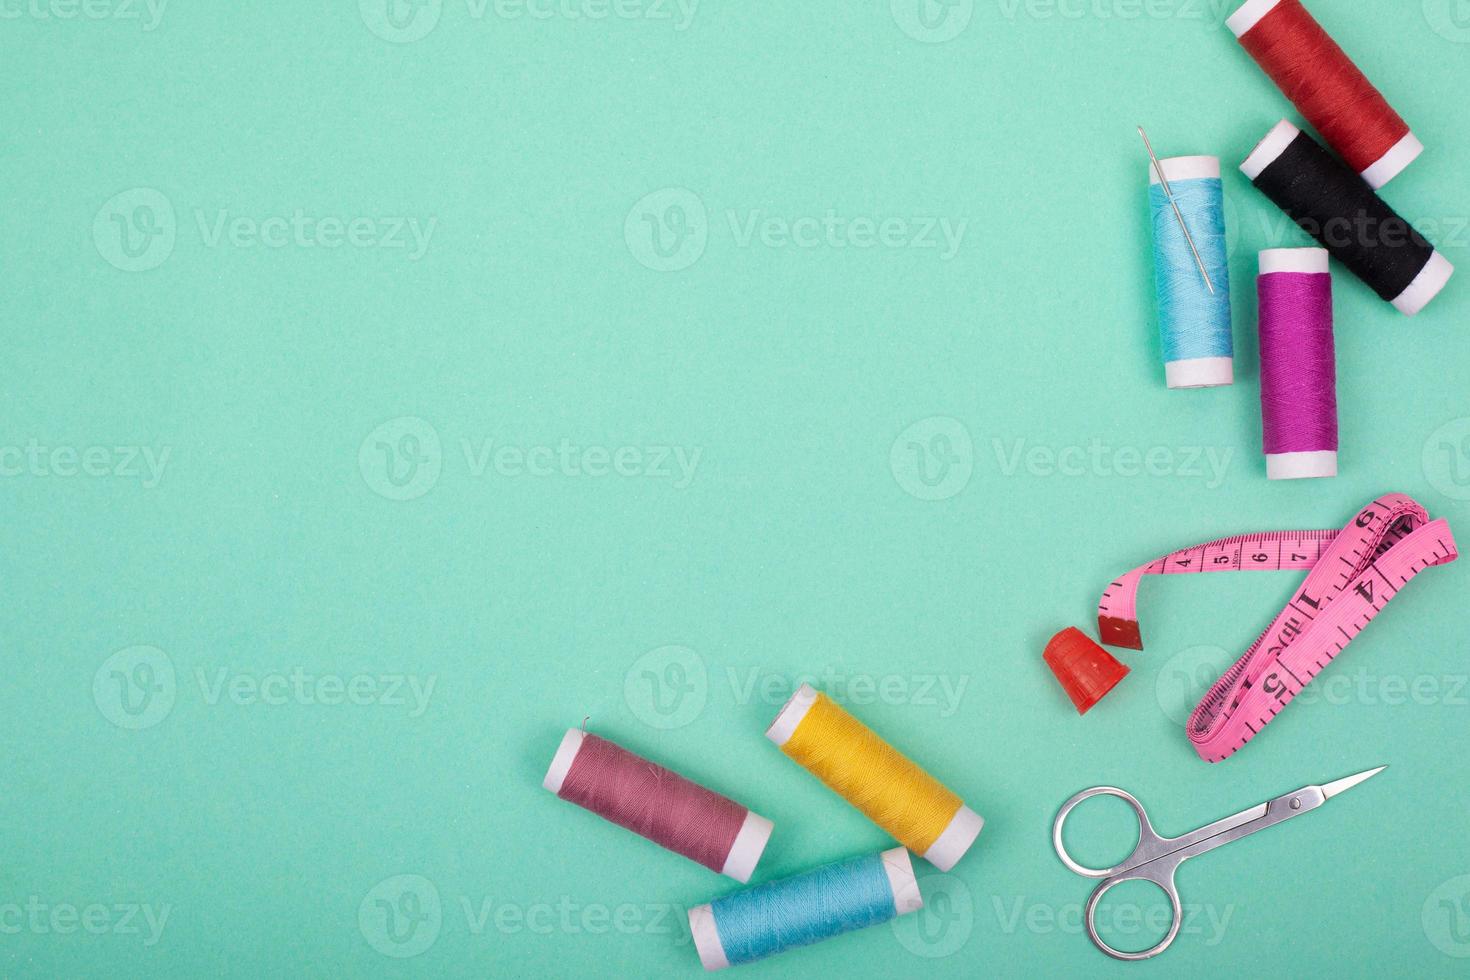 Sewing kit accessories with colorful threads, needles, pins, scissors on green background photo